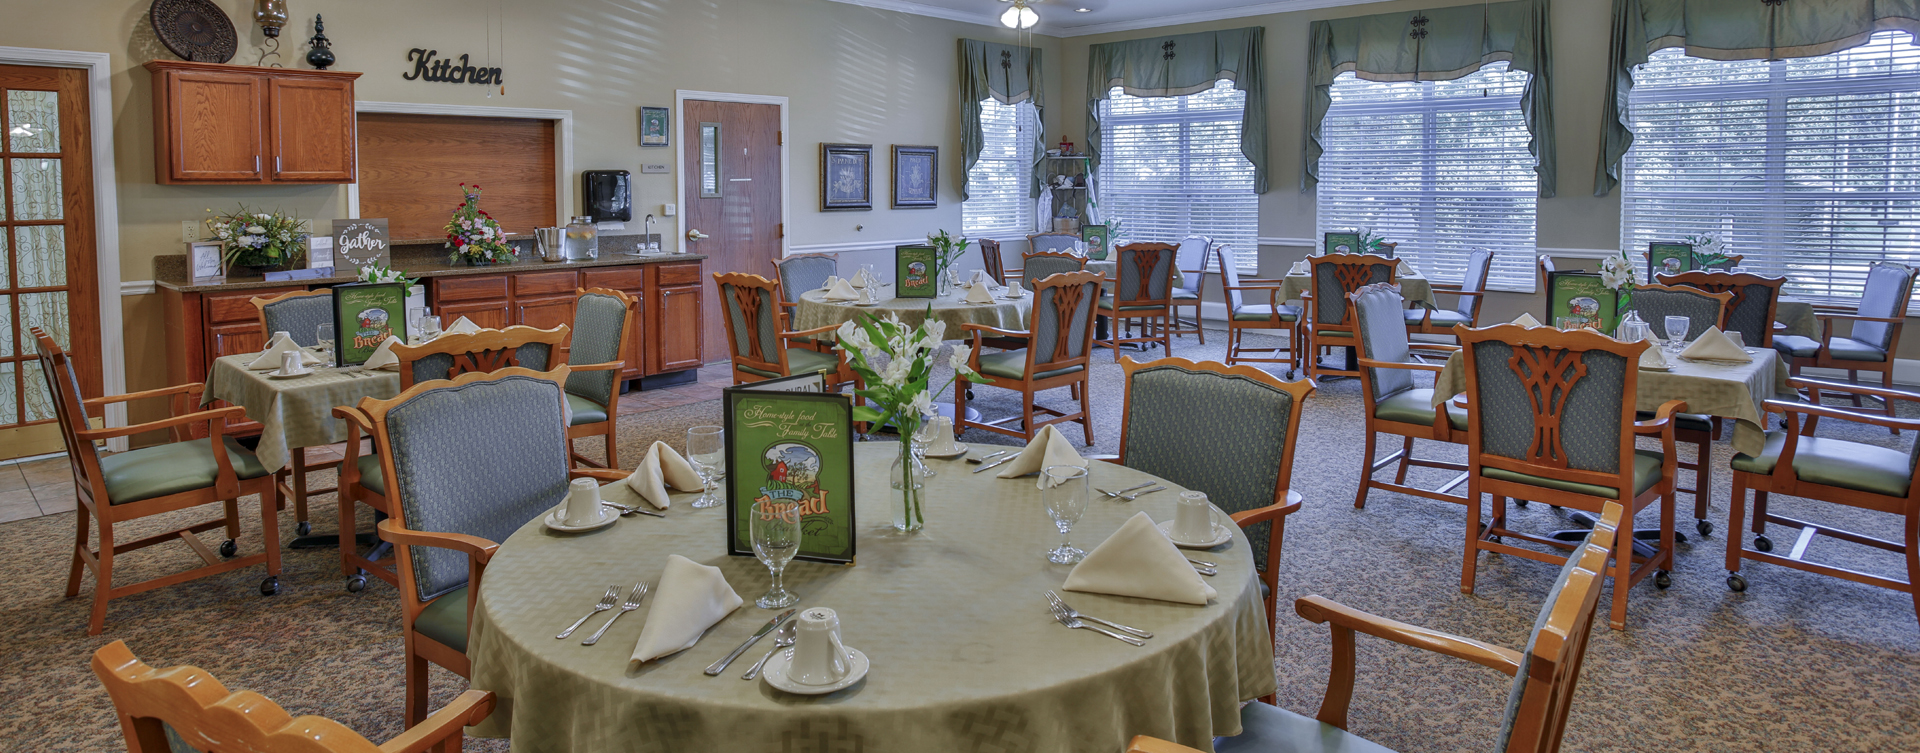 Enjoy restaurant -style meals served three times a day in our dining room at Bickford of Crawfordsville